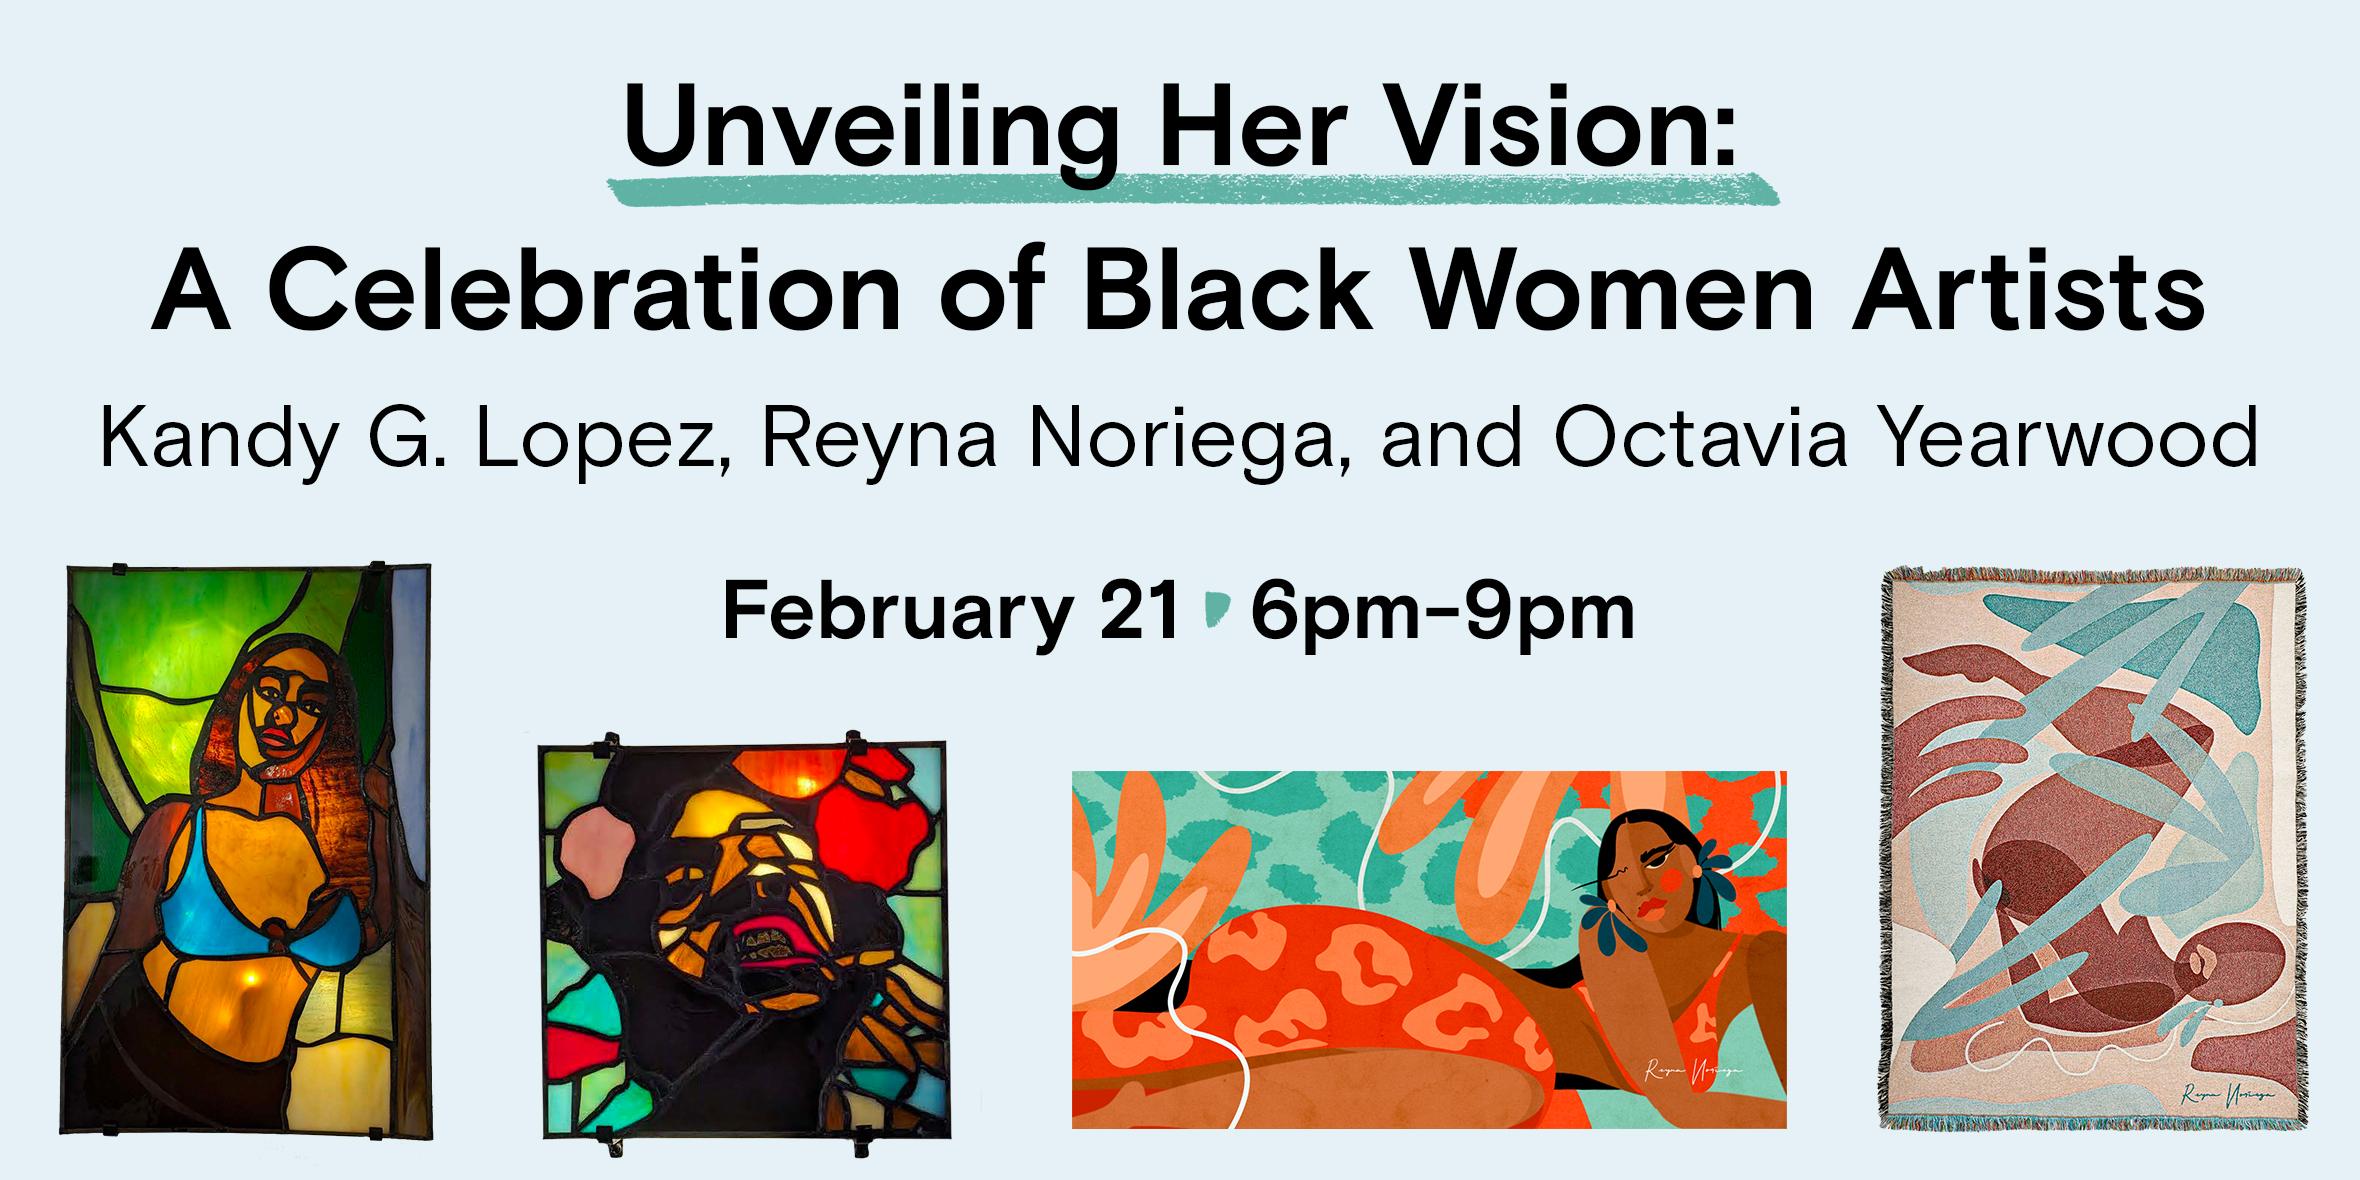 Unveiling Her Vision: A Celebration of Black Women Artists at Arlo Wynwood